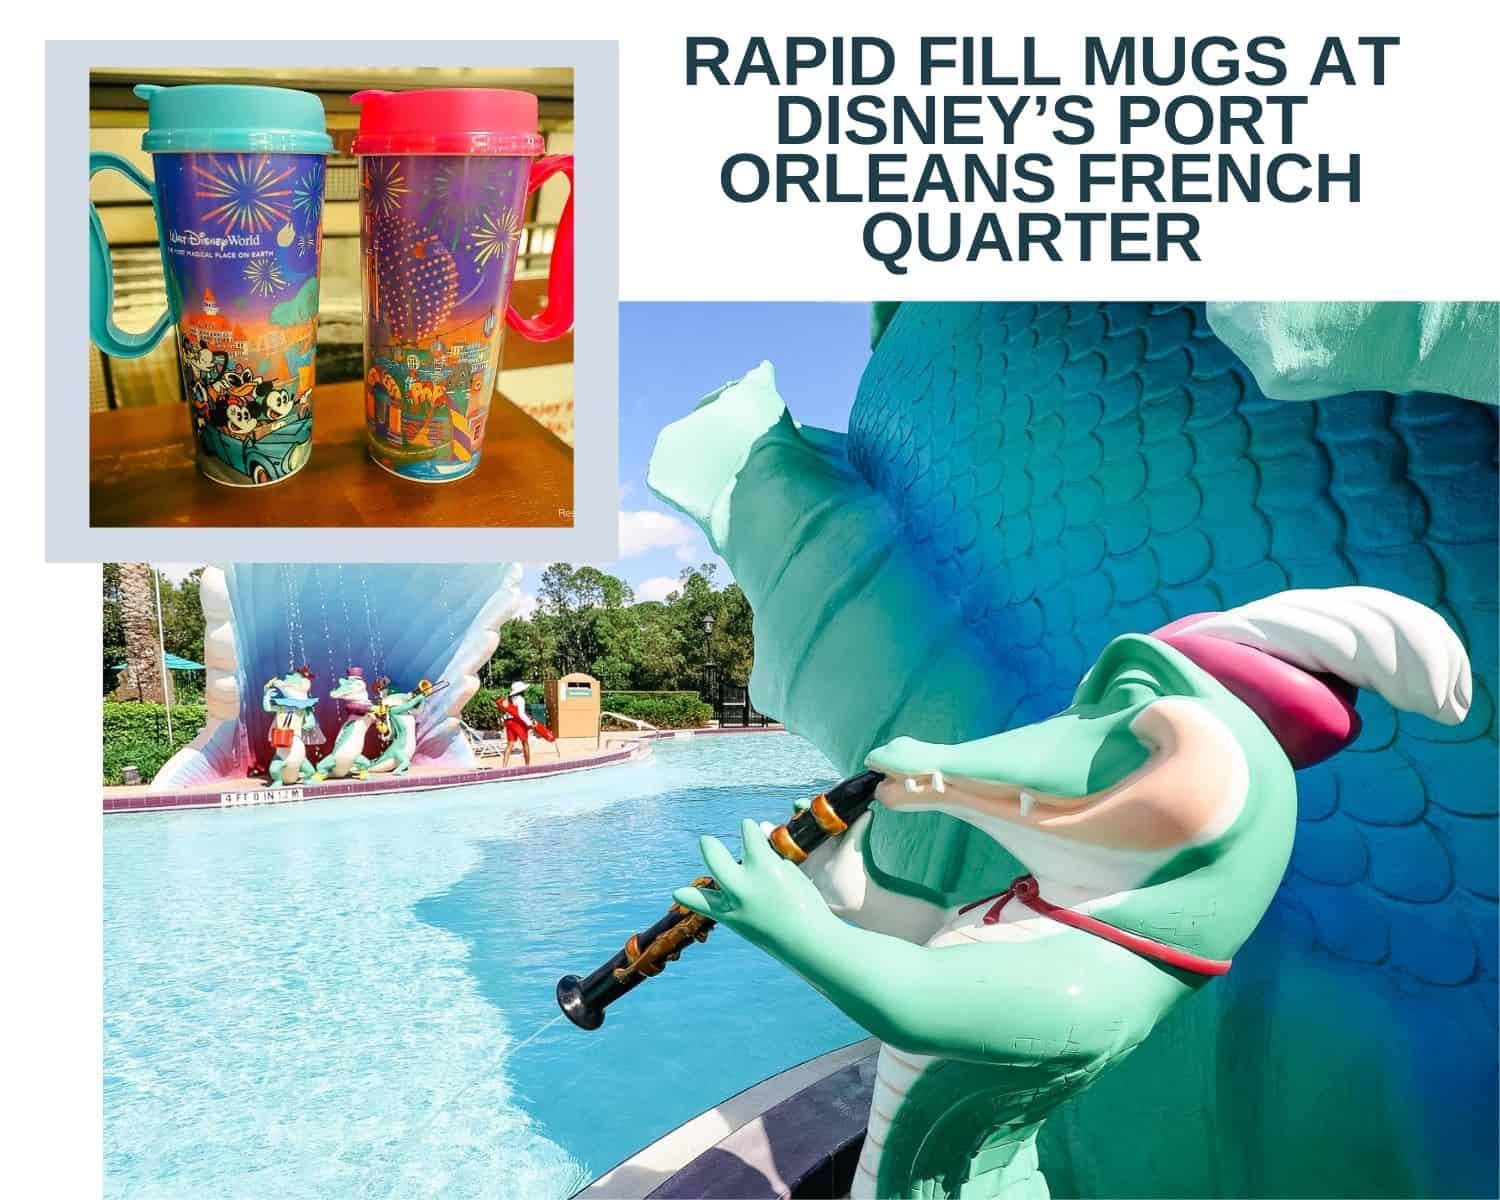 Where to Refill Rapid Fill Mugs at Disney’s Port Orleans French Quarter (with Drink Options)